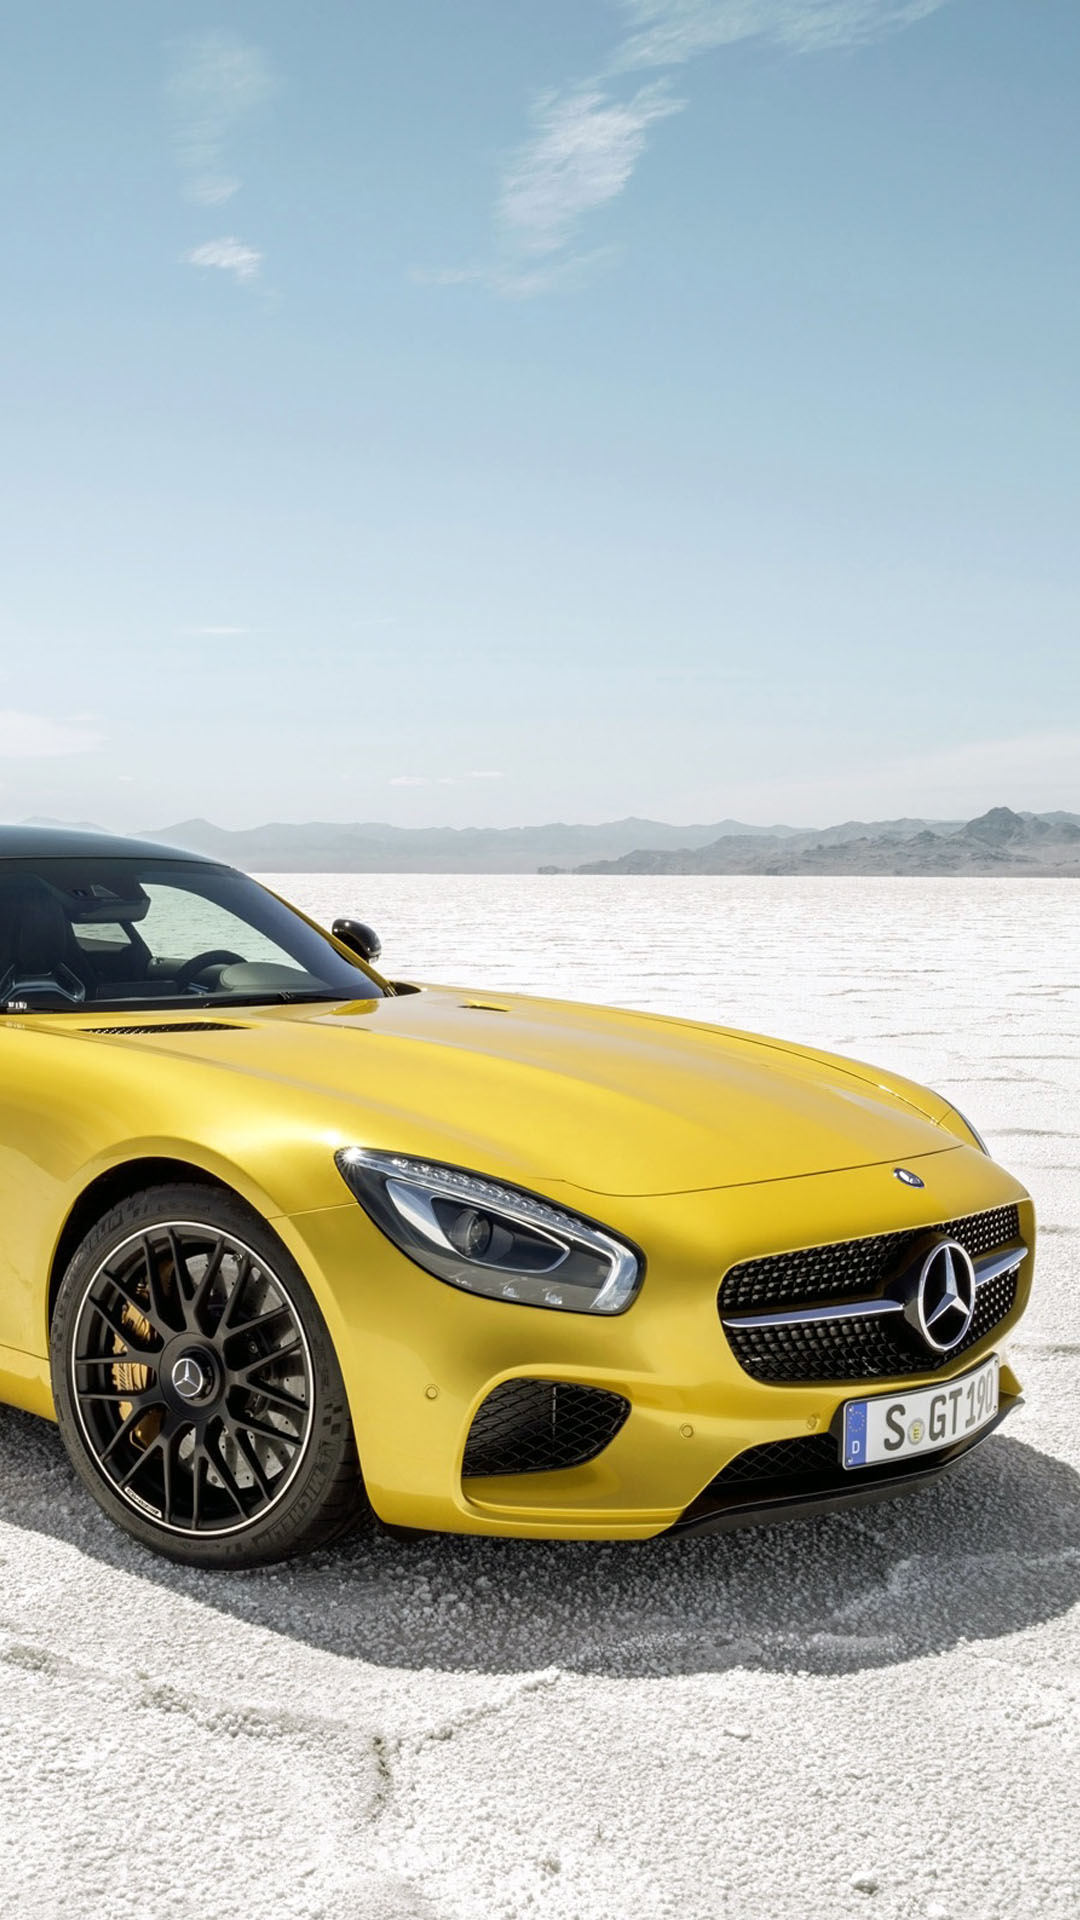 2015 Mercedes AMG GT Wallpaper   Free iPhone Wallpapers